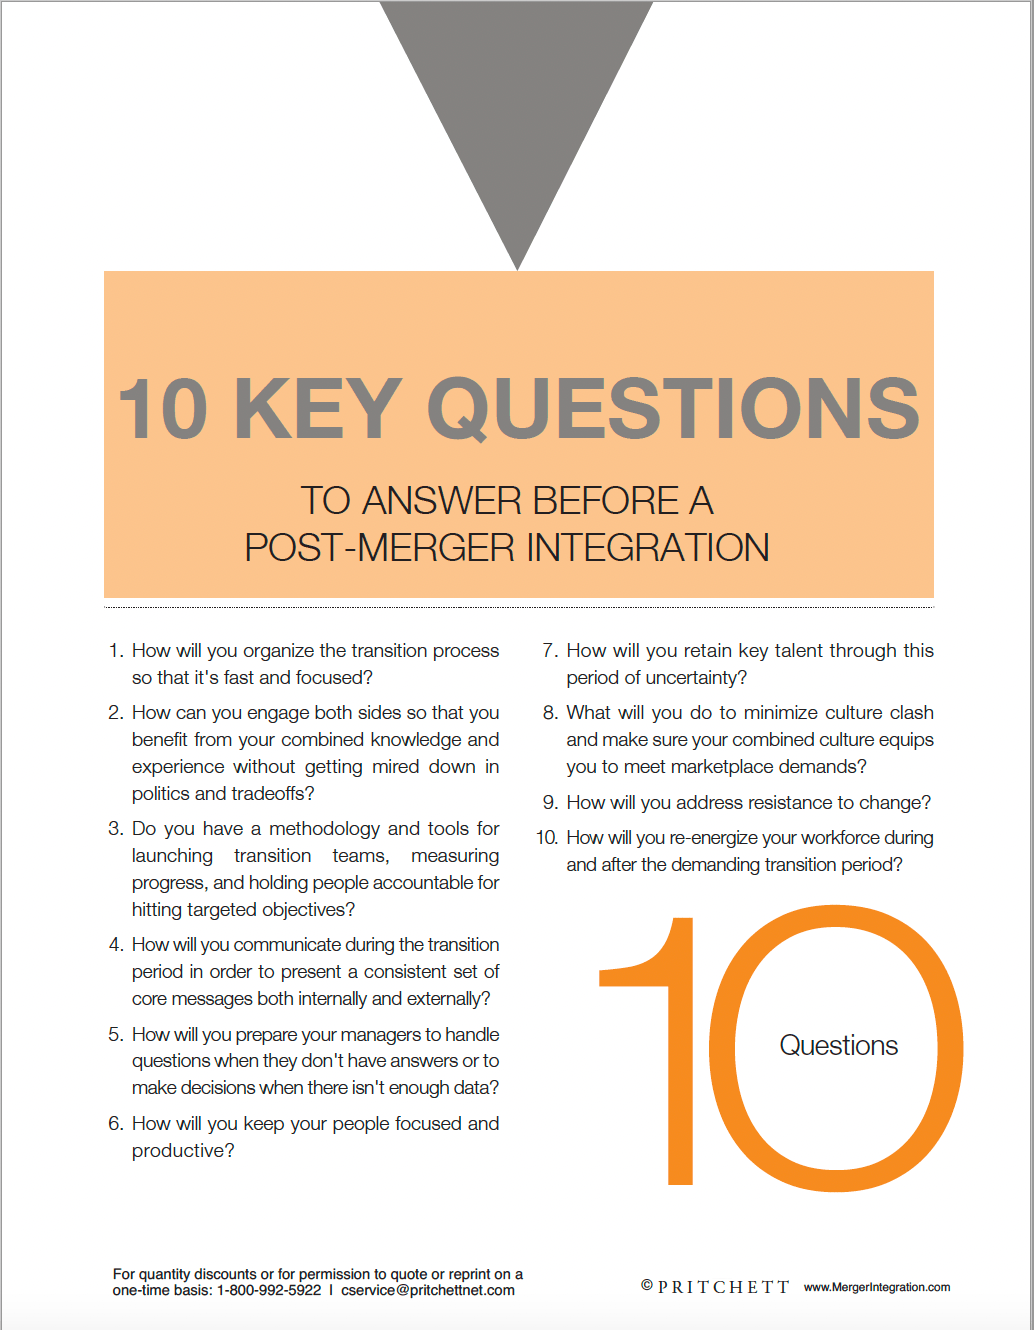 10 Questions to Answer Before a Post-Merger Integration